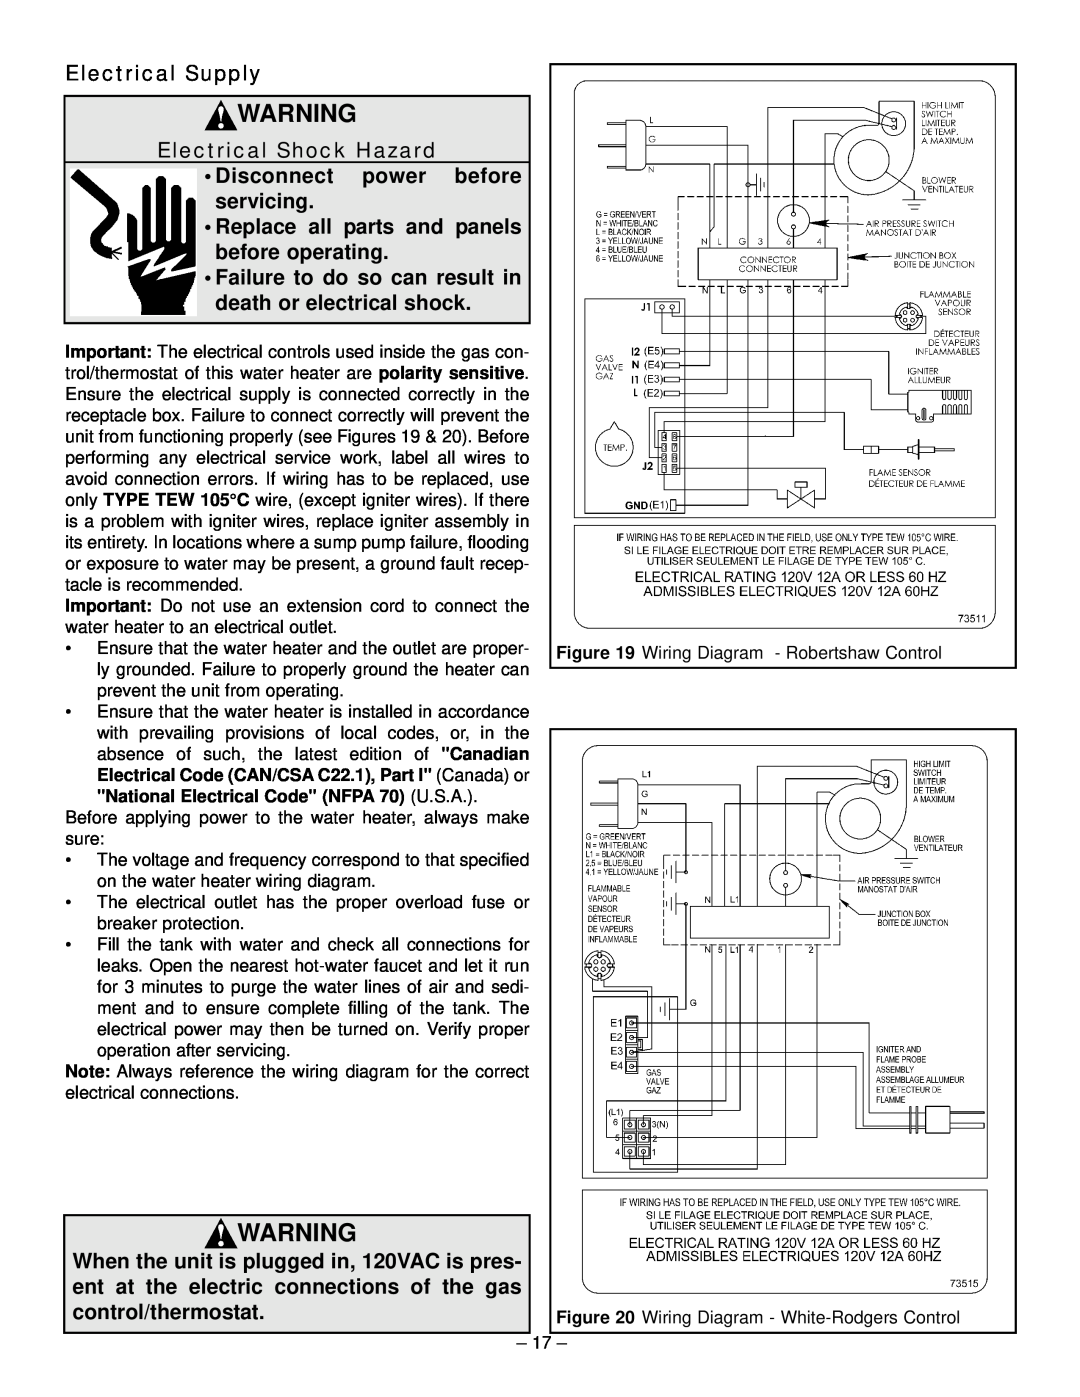 GSW 319594-000 manual Electrical Supply, Electrical Shock Hazard, Disconnect power before servicing, control/thermostat 